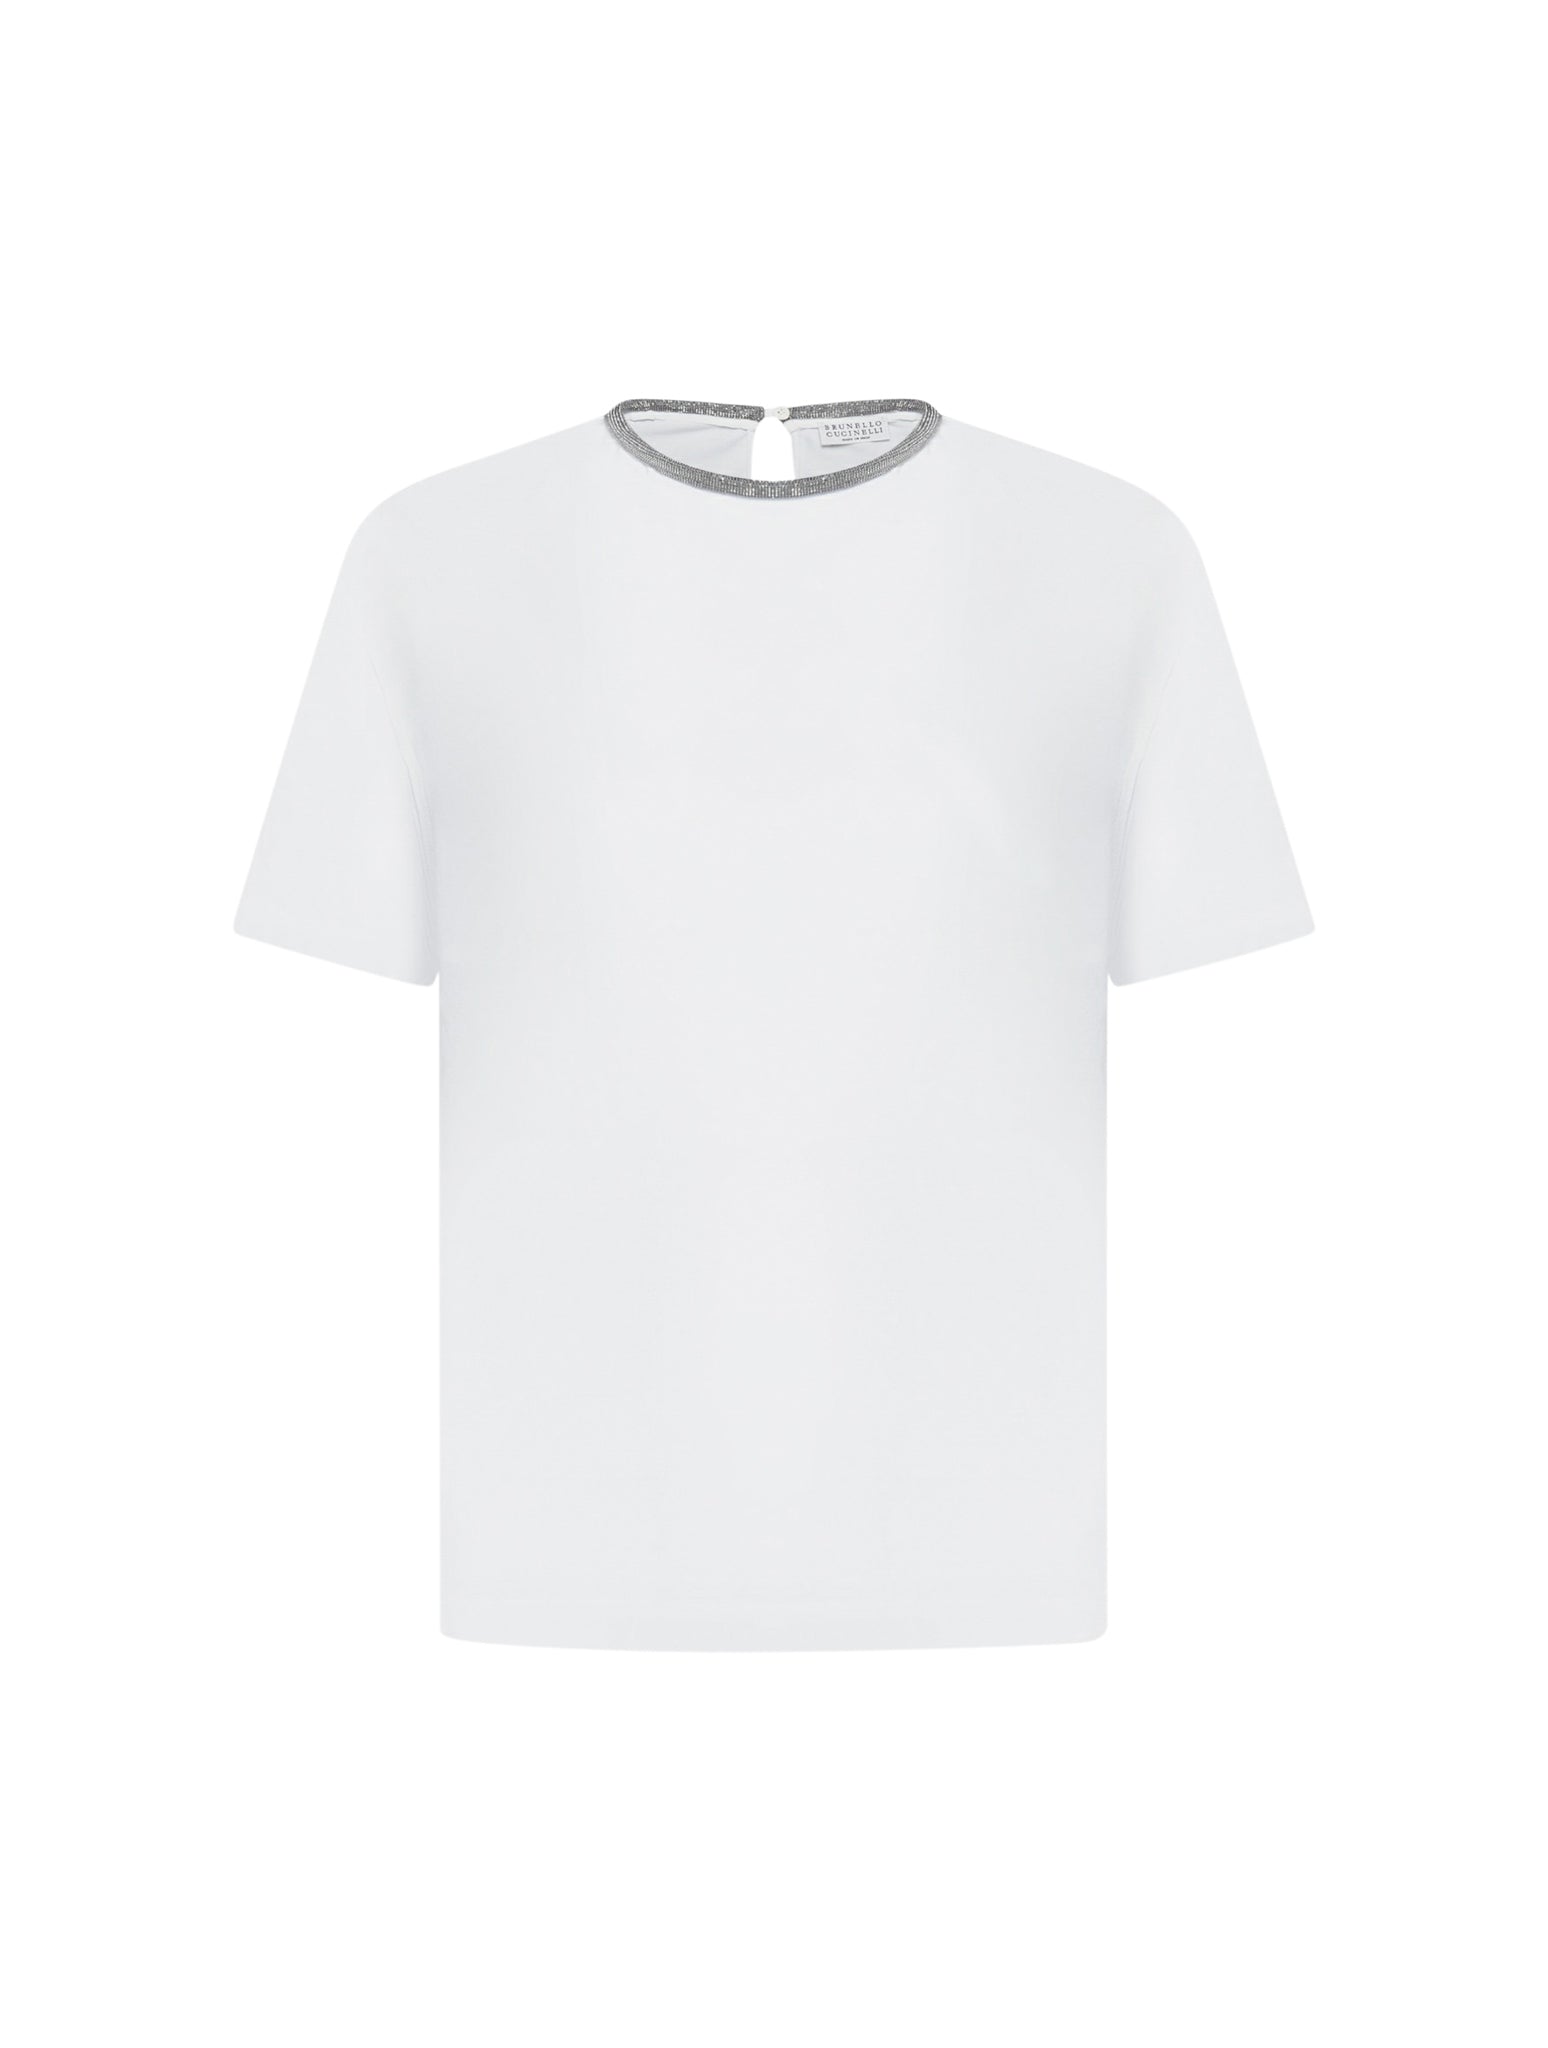 Cotton T-shirt with jewel